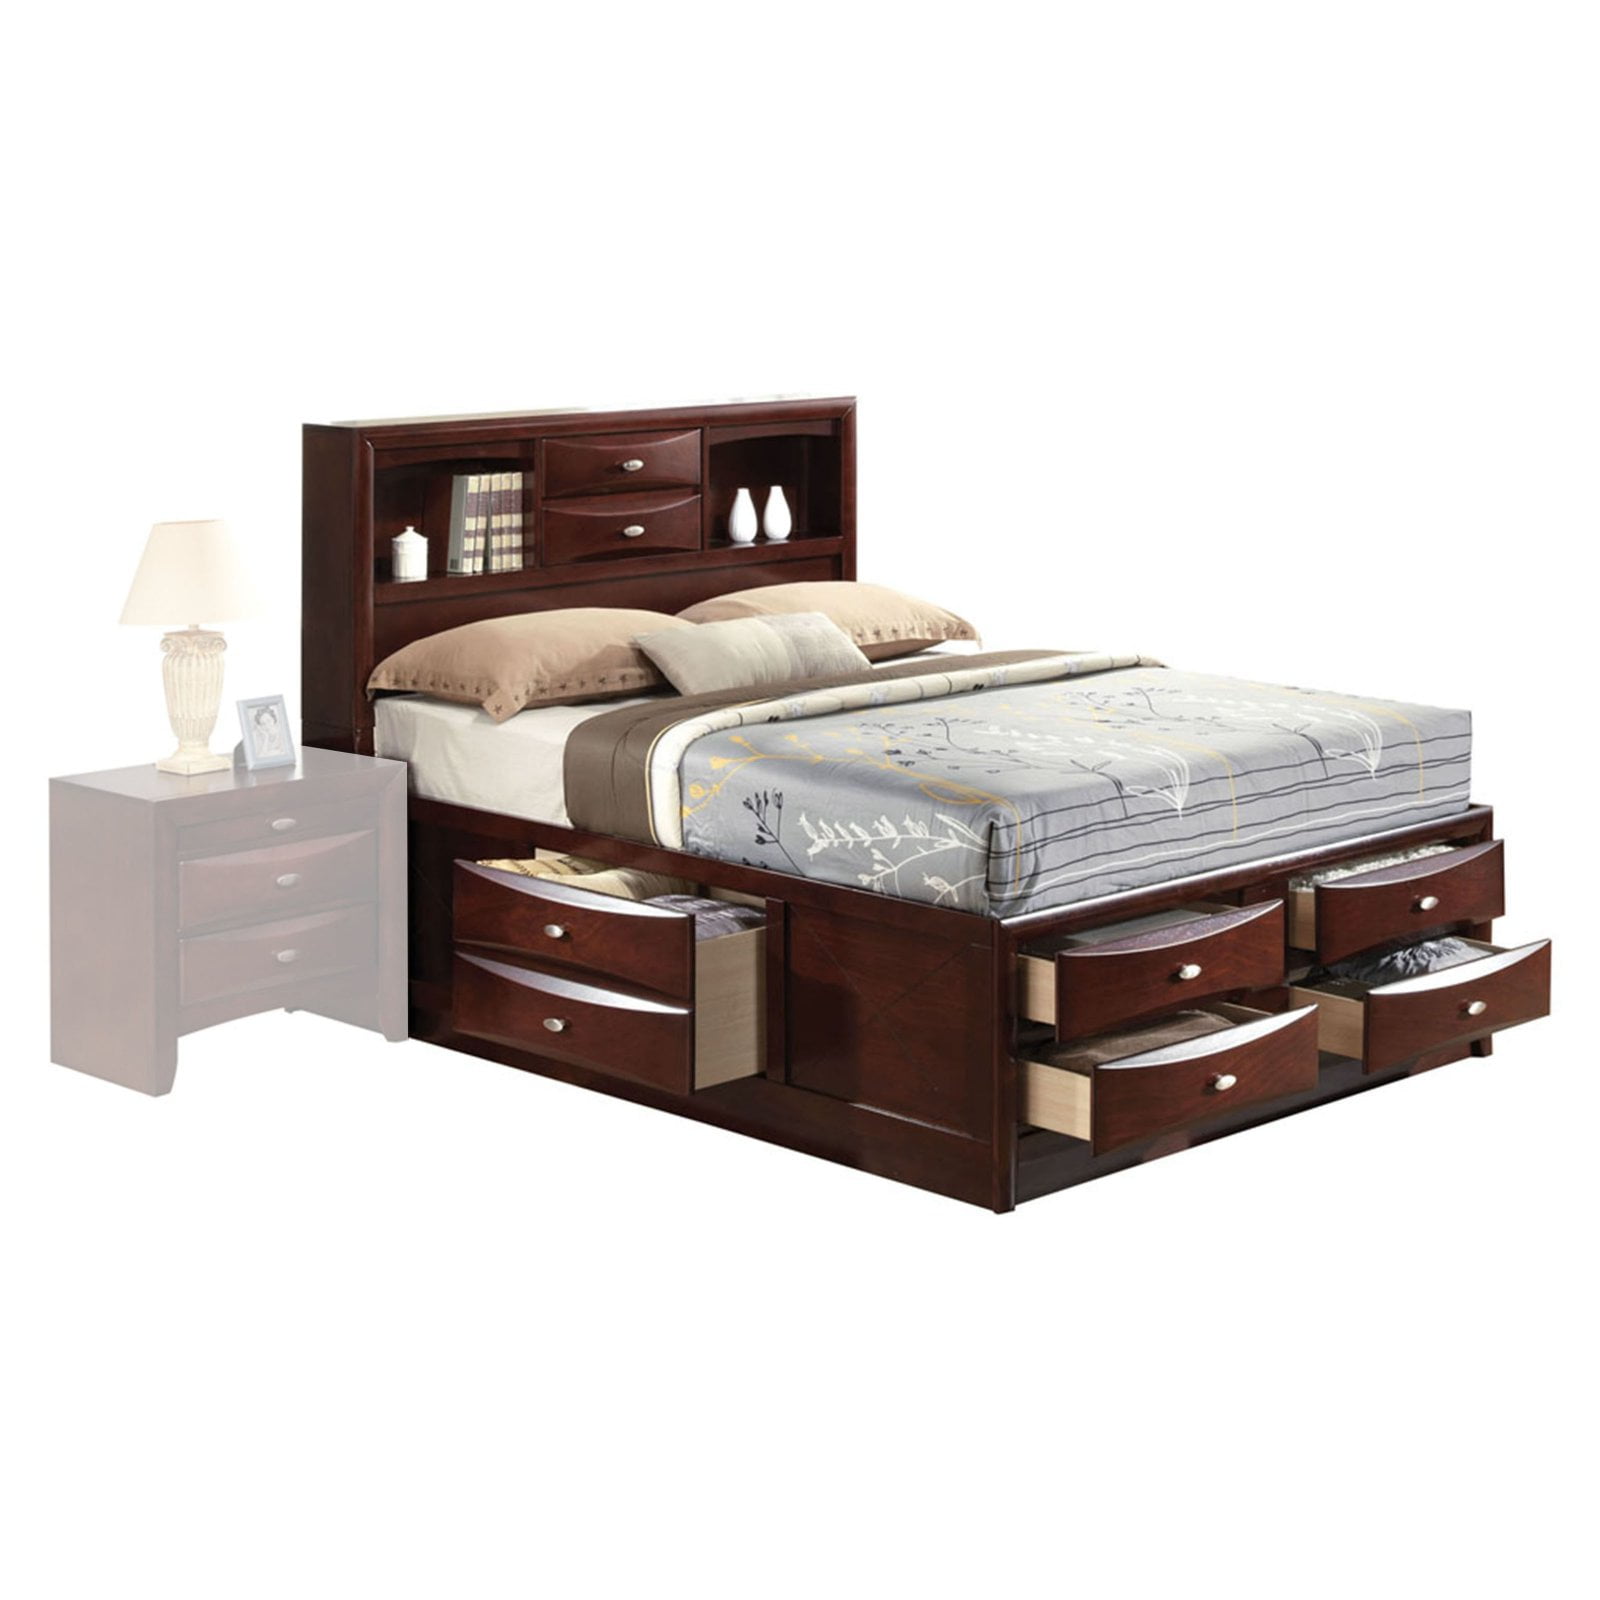 Picture of ACME 21590F Ireland Full Size Bed with Storage - Espresso, 4 Piece